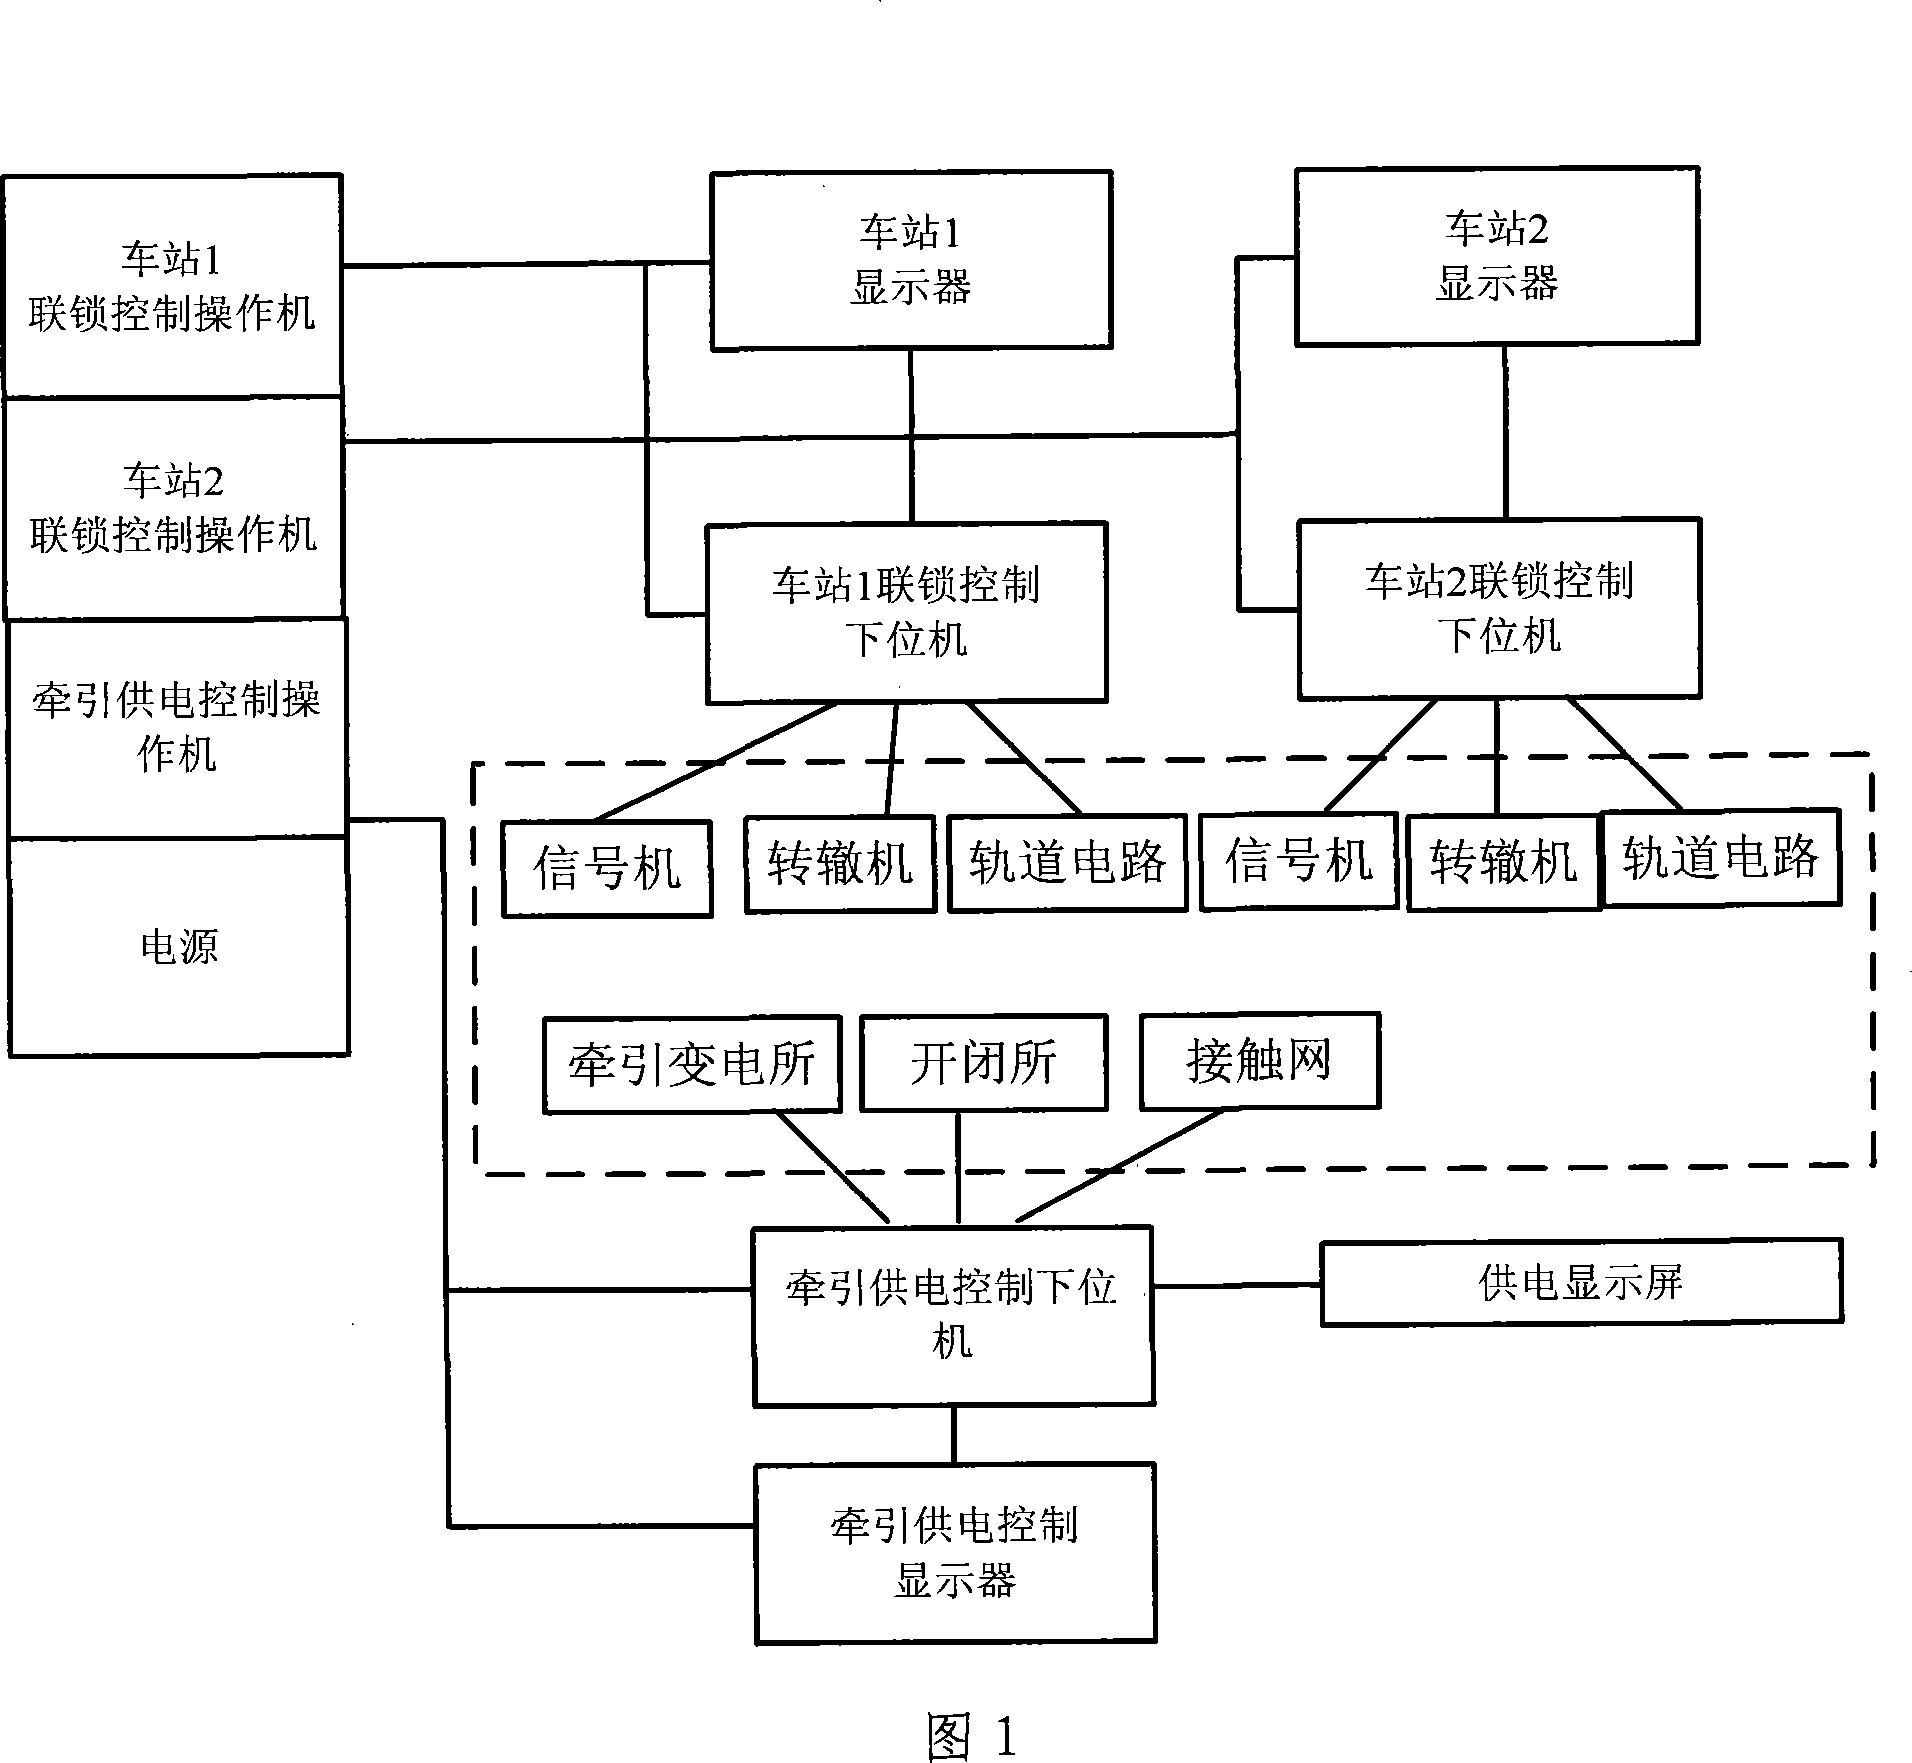 Computer interlock and traction power supplying simulation control system